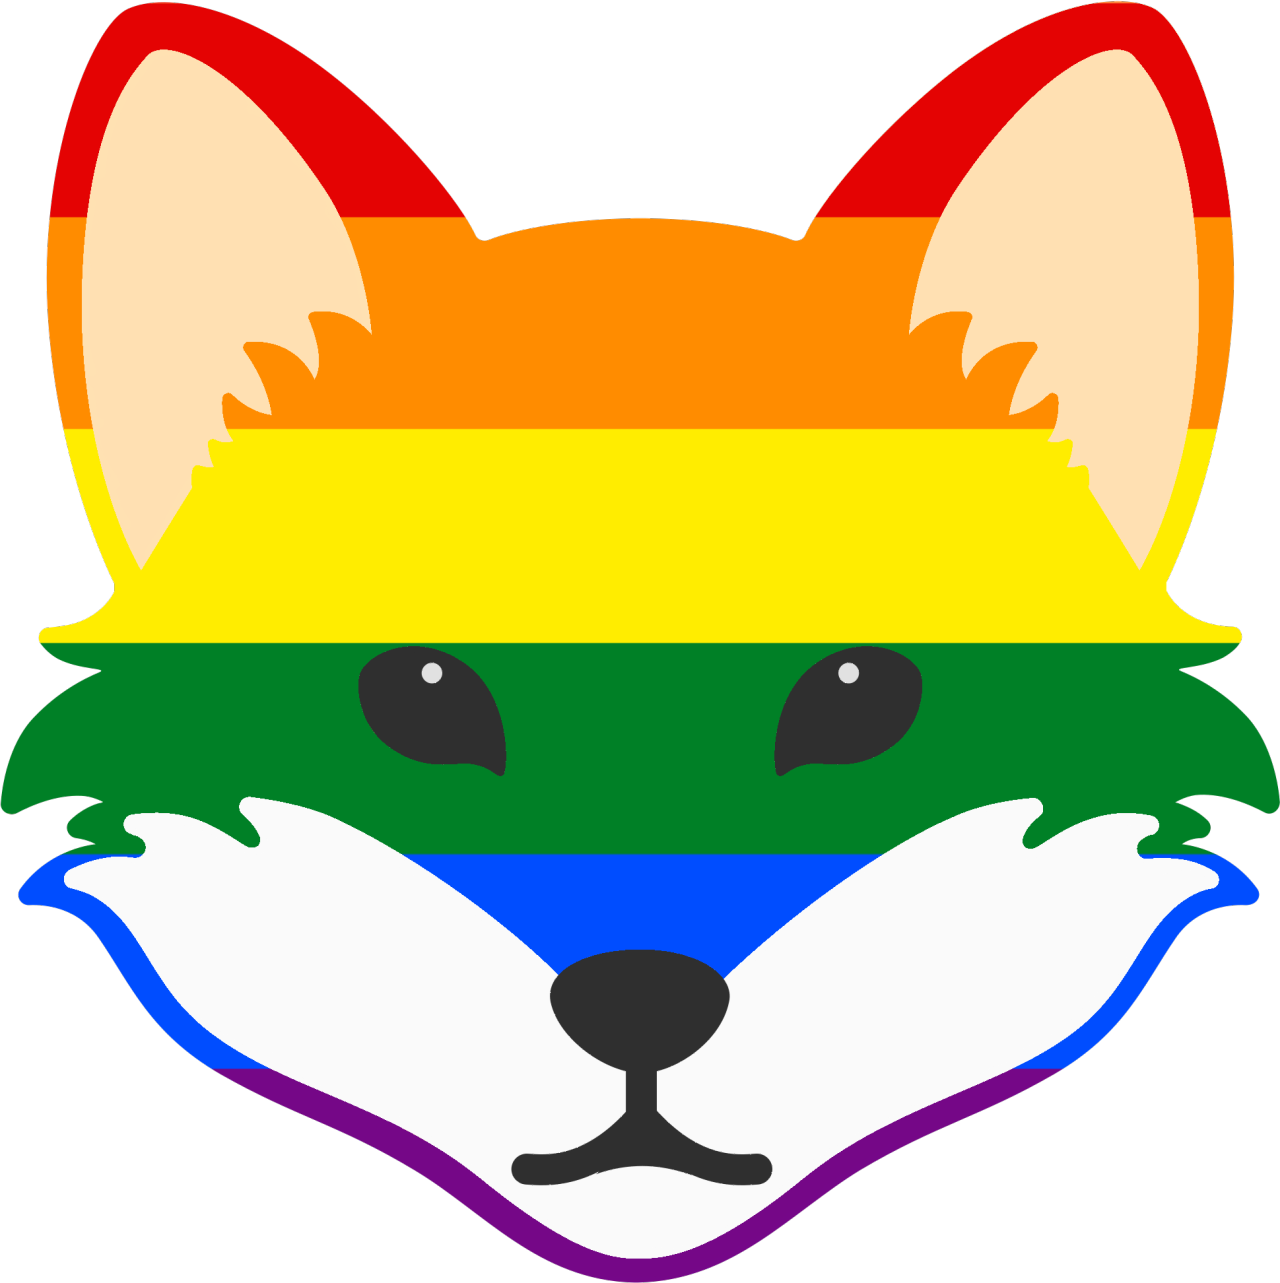 A fox emoji with the colors of the rainbow gay flag.